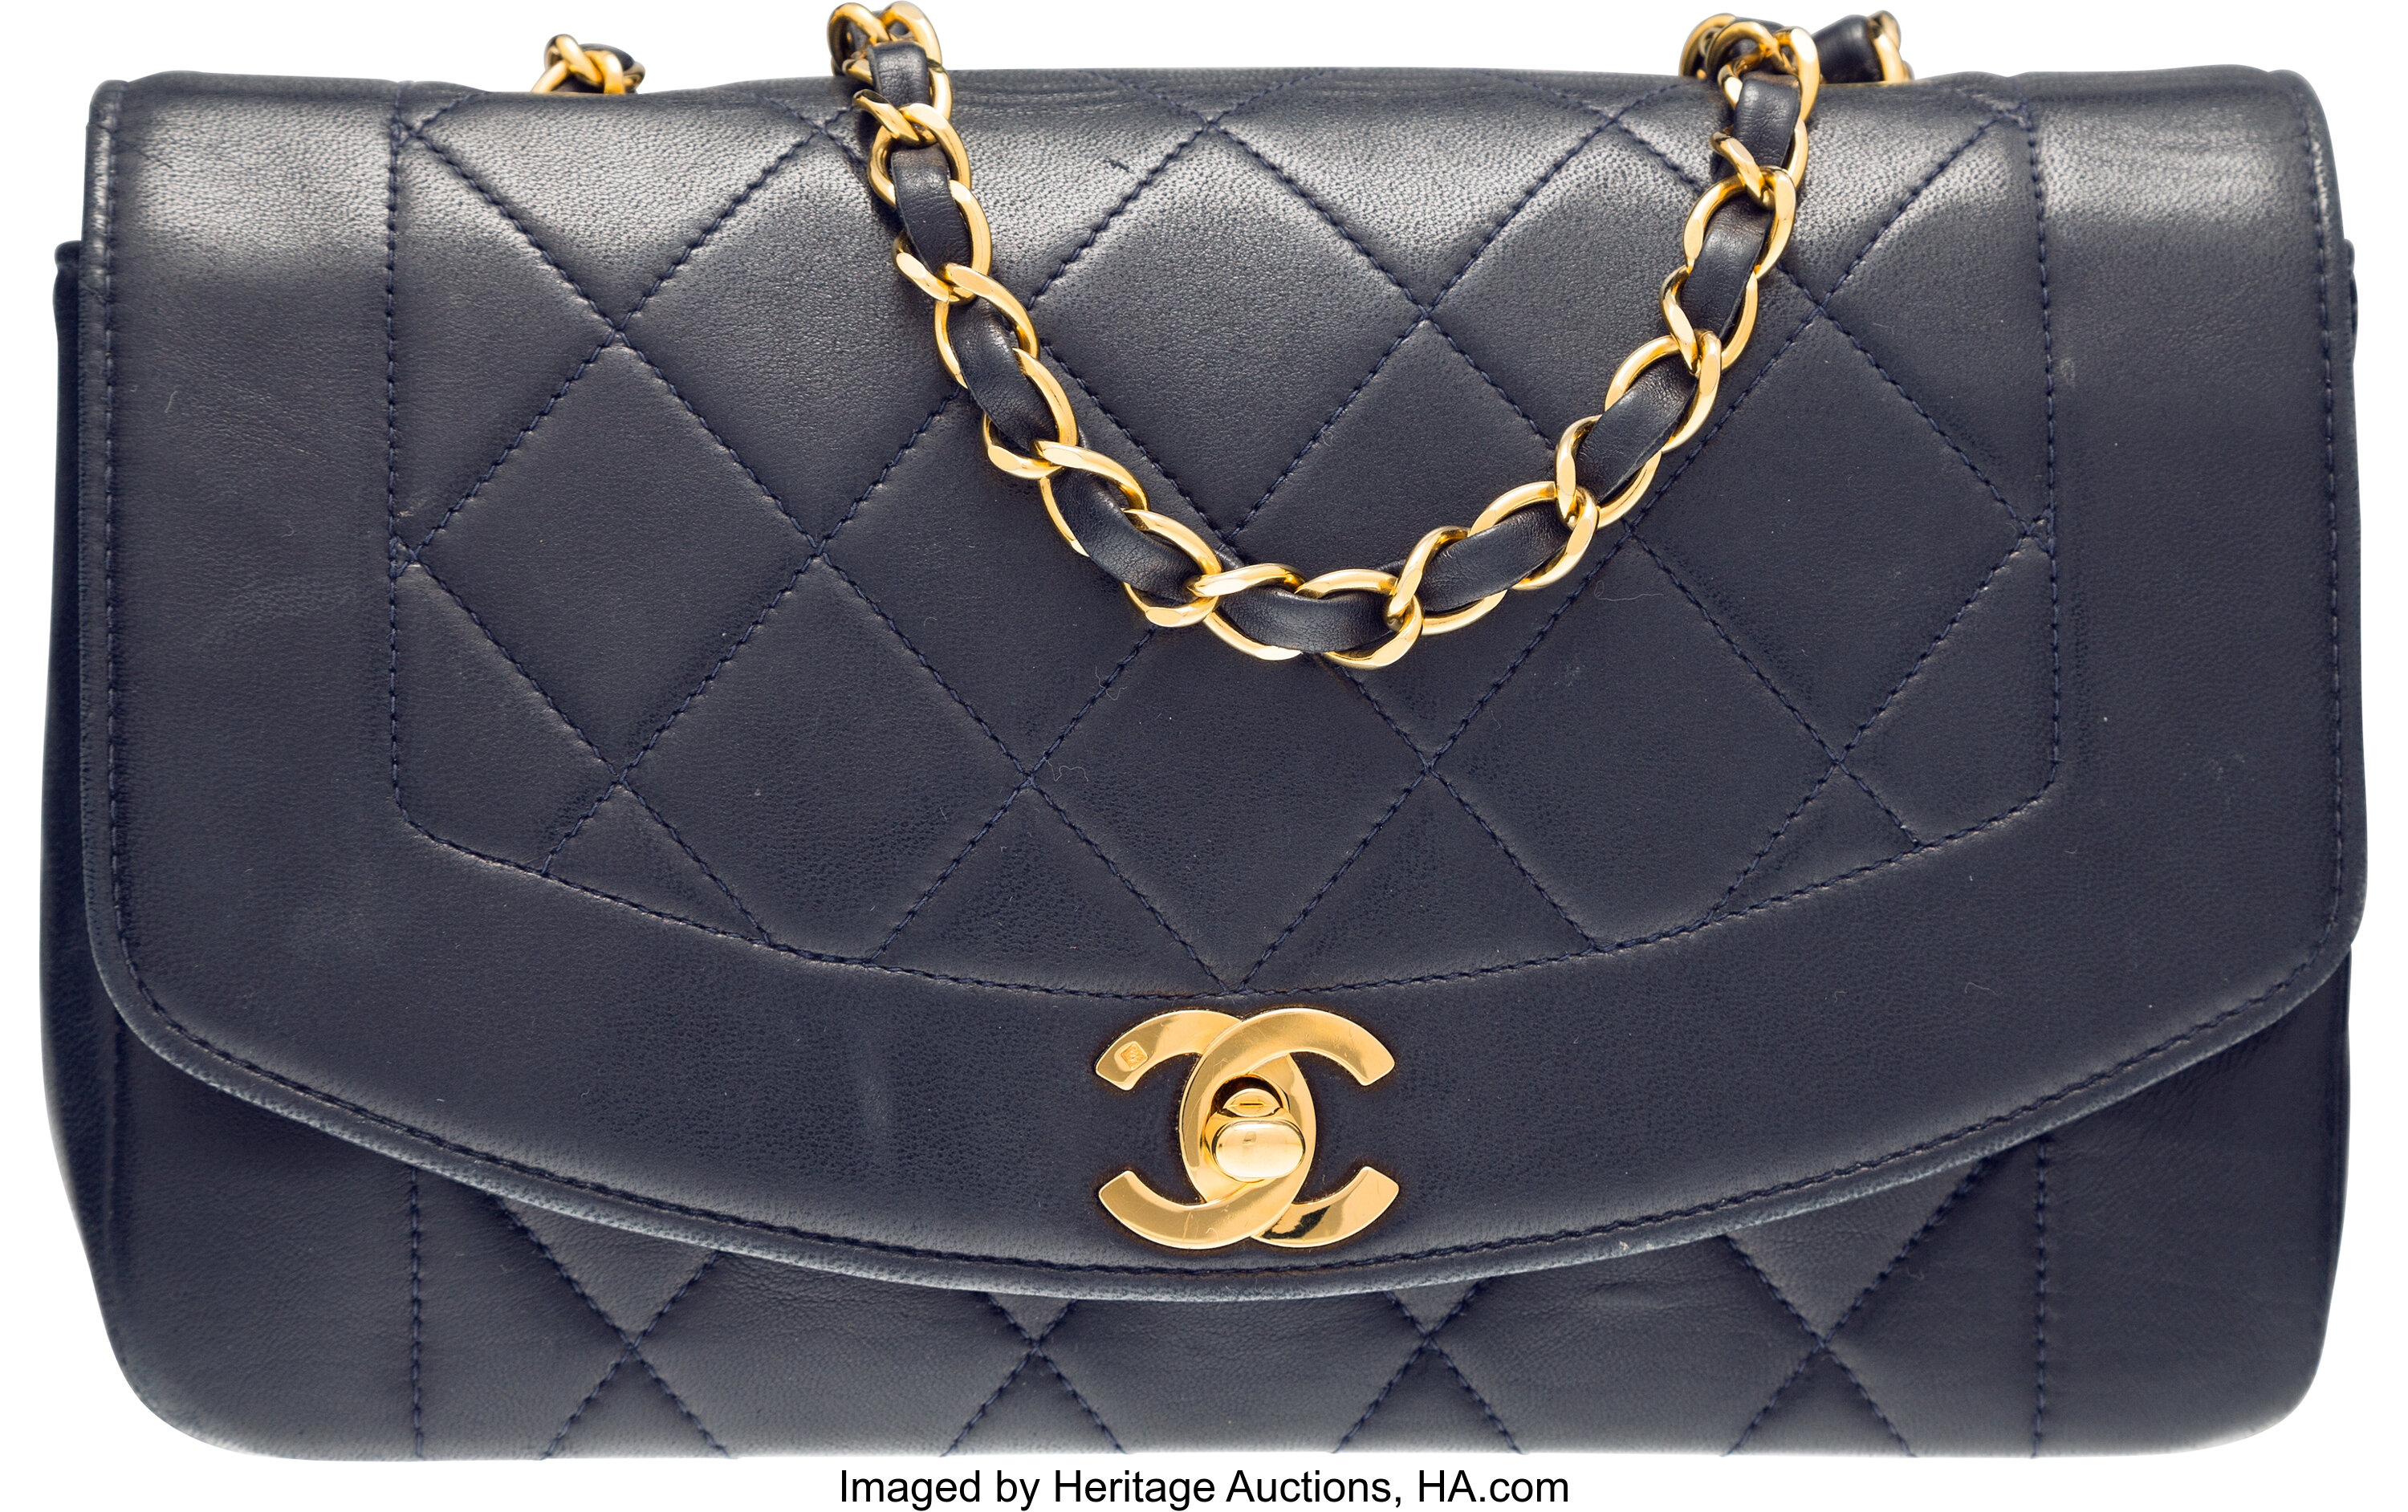 Bag of the Day 56: CHANEL 19A Statement Flap Bag in Marine Navy Blue  Calfskin Leather #bagoftheday 